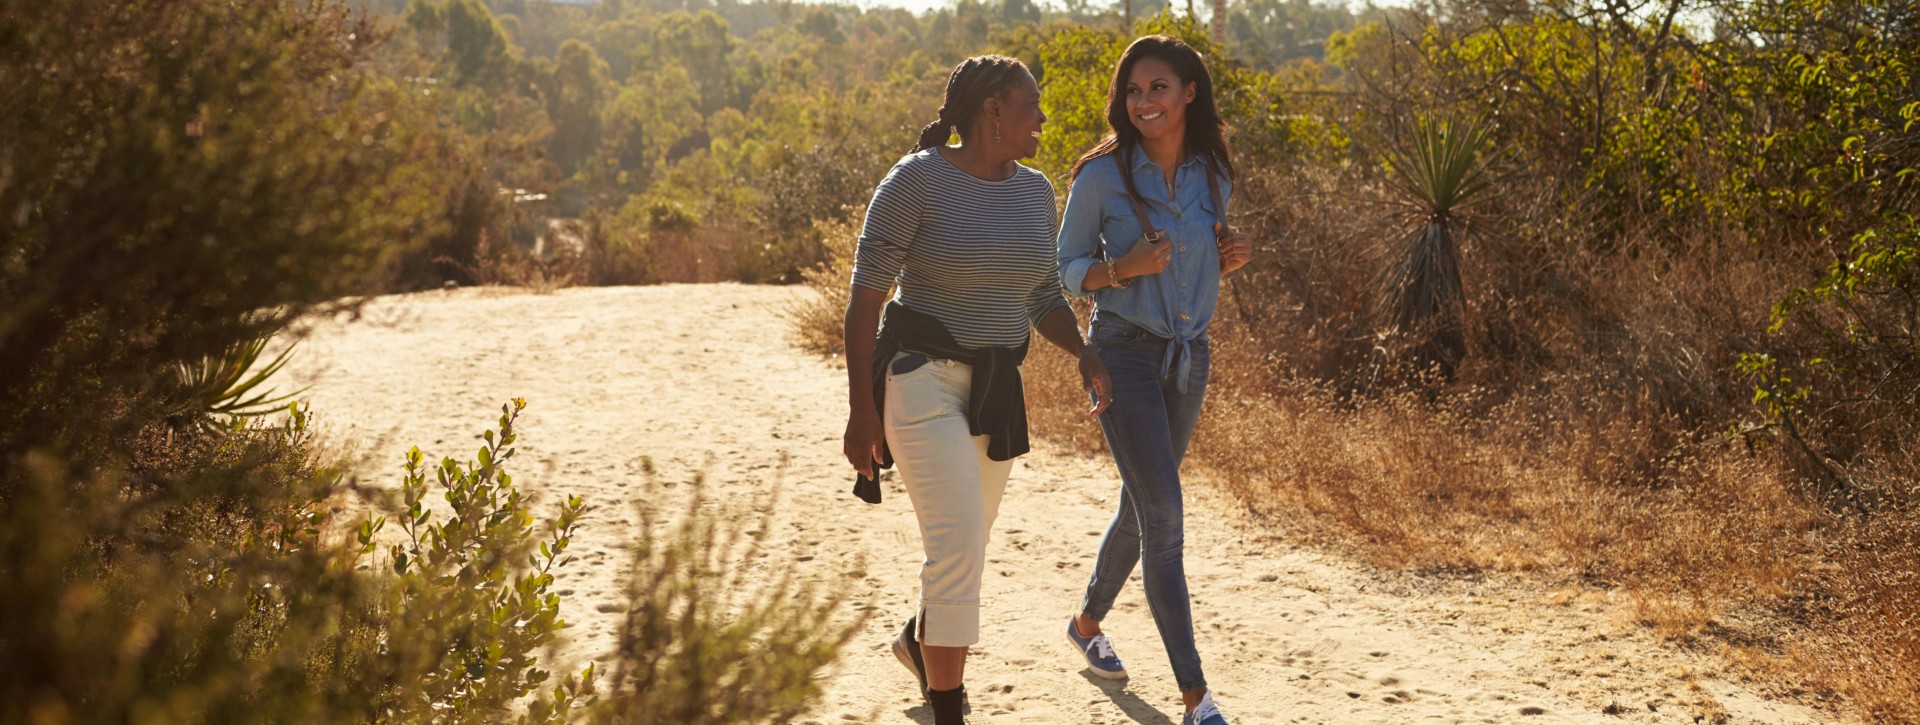 Mother And Adult Daughter Hiking Outdoors In Countryside